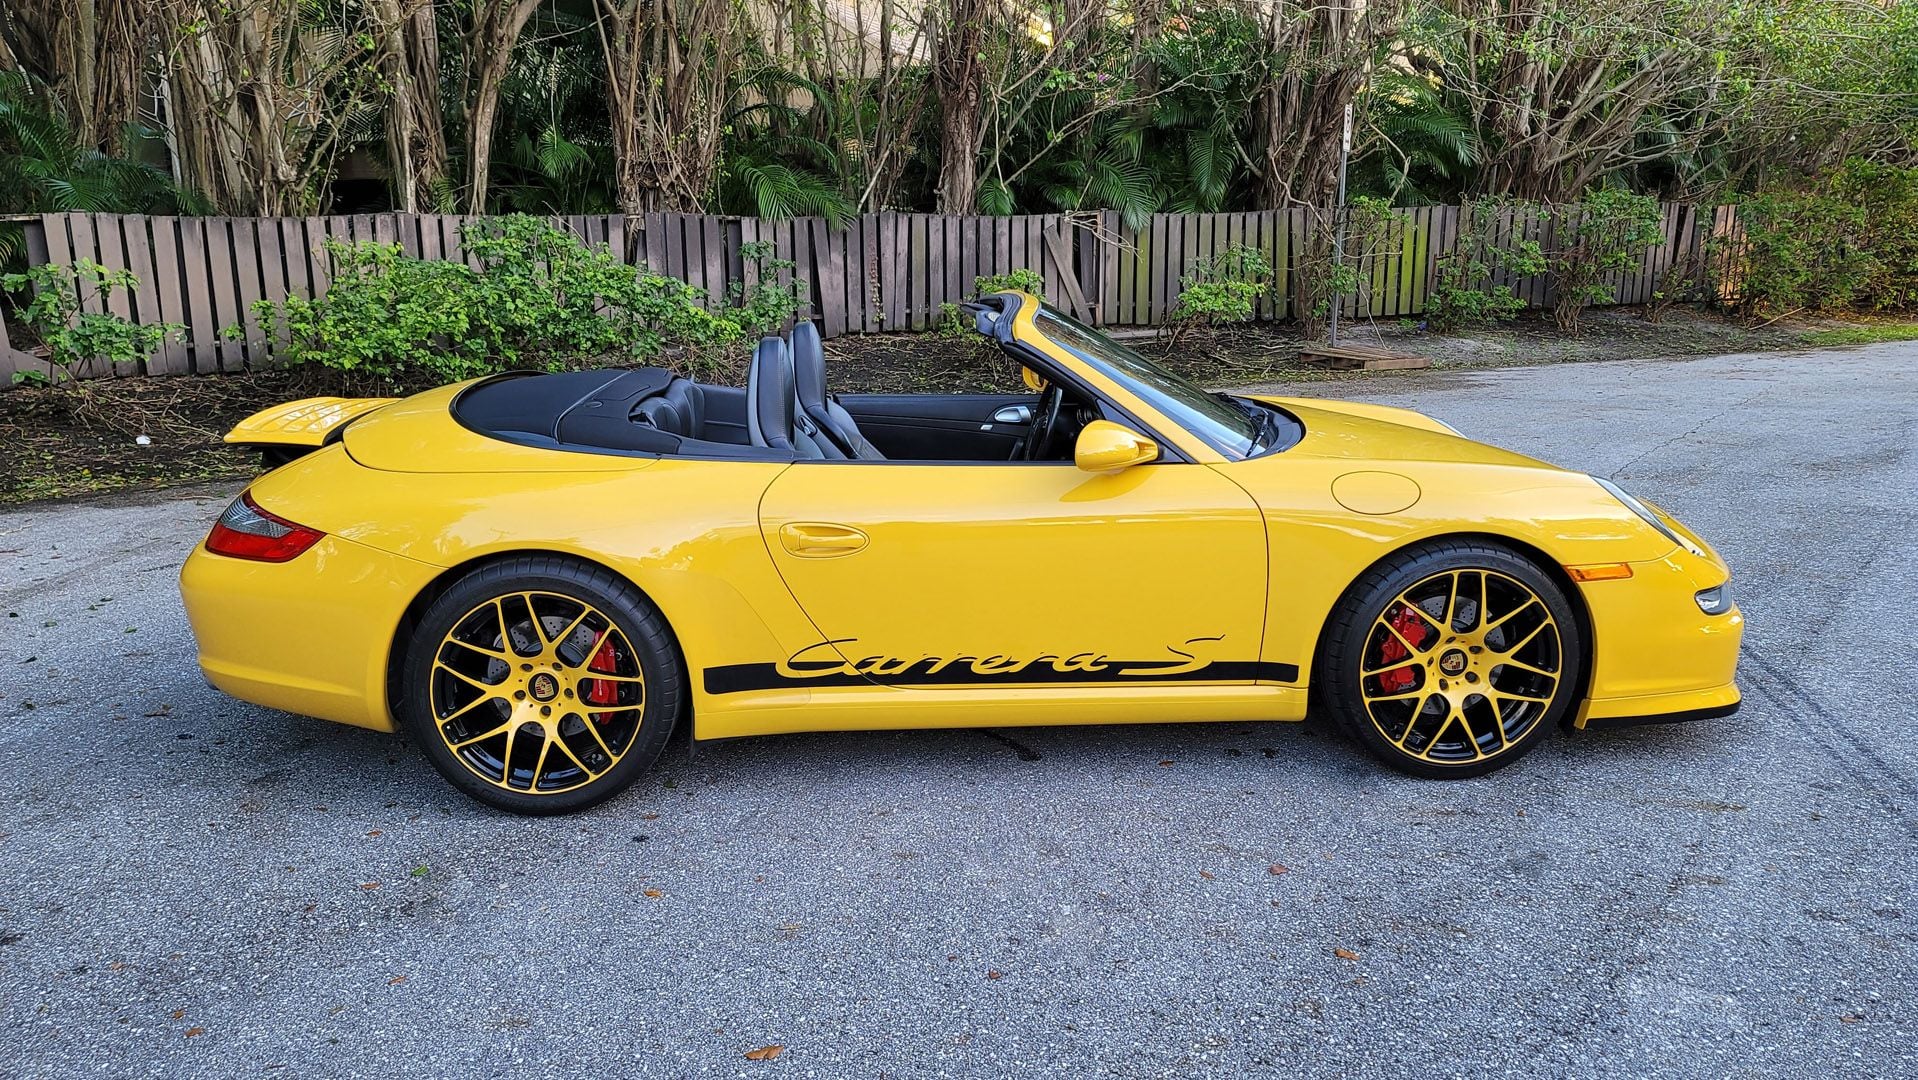 2008 Porsche 911 - 2008 Porsche 911 Carrera S Cab. Speed Yellow. 6MT 20k miles - Used - VIN 00000000000000000 - 20,566 Miles - 6 cyl - 2WD - Manual - Convertible - Yellow - Ft. Lauderdale, FL 33314, United States